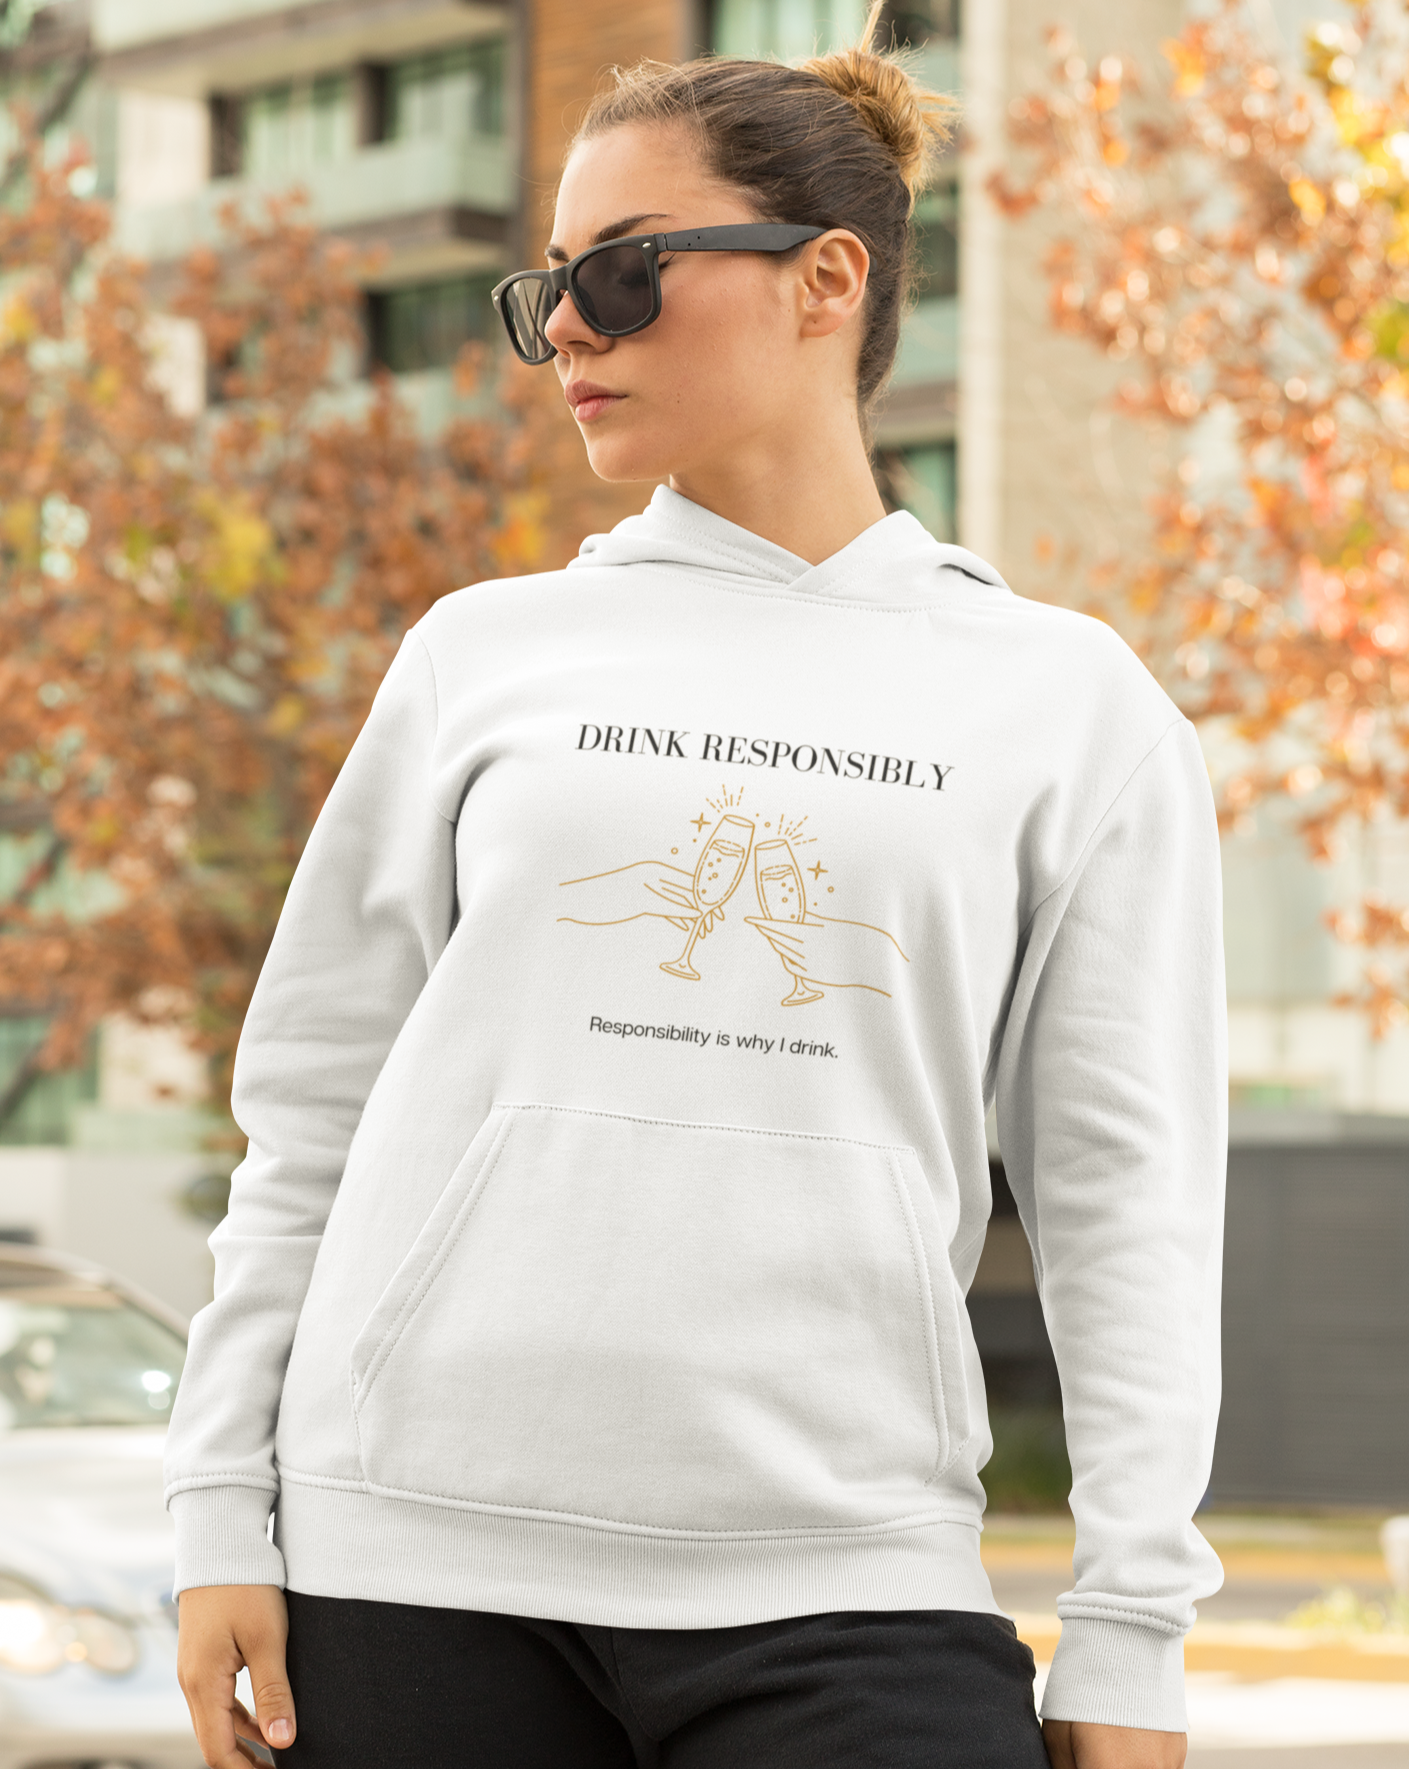 This is the ultimate adulting hoodie sweatshirt. With a champagne glass cheers design, this is not only stylish but hilarious. The more responsibility you have, the more you drink. That’s how it works right? Made with high quality cotton, this sweatshirt is a must have for your collection.